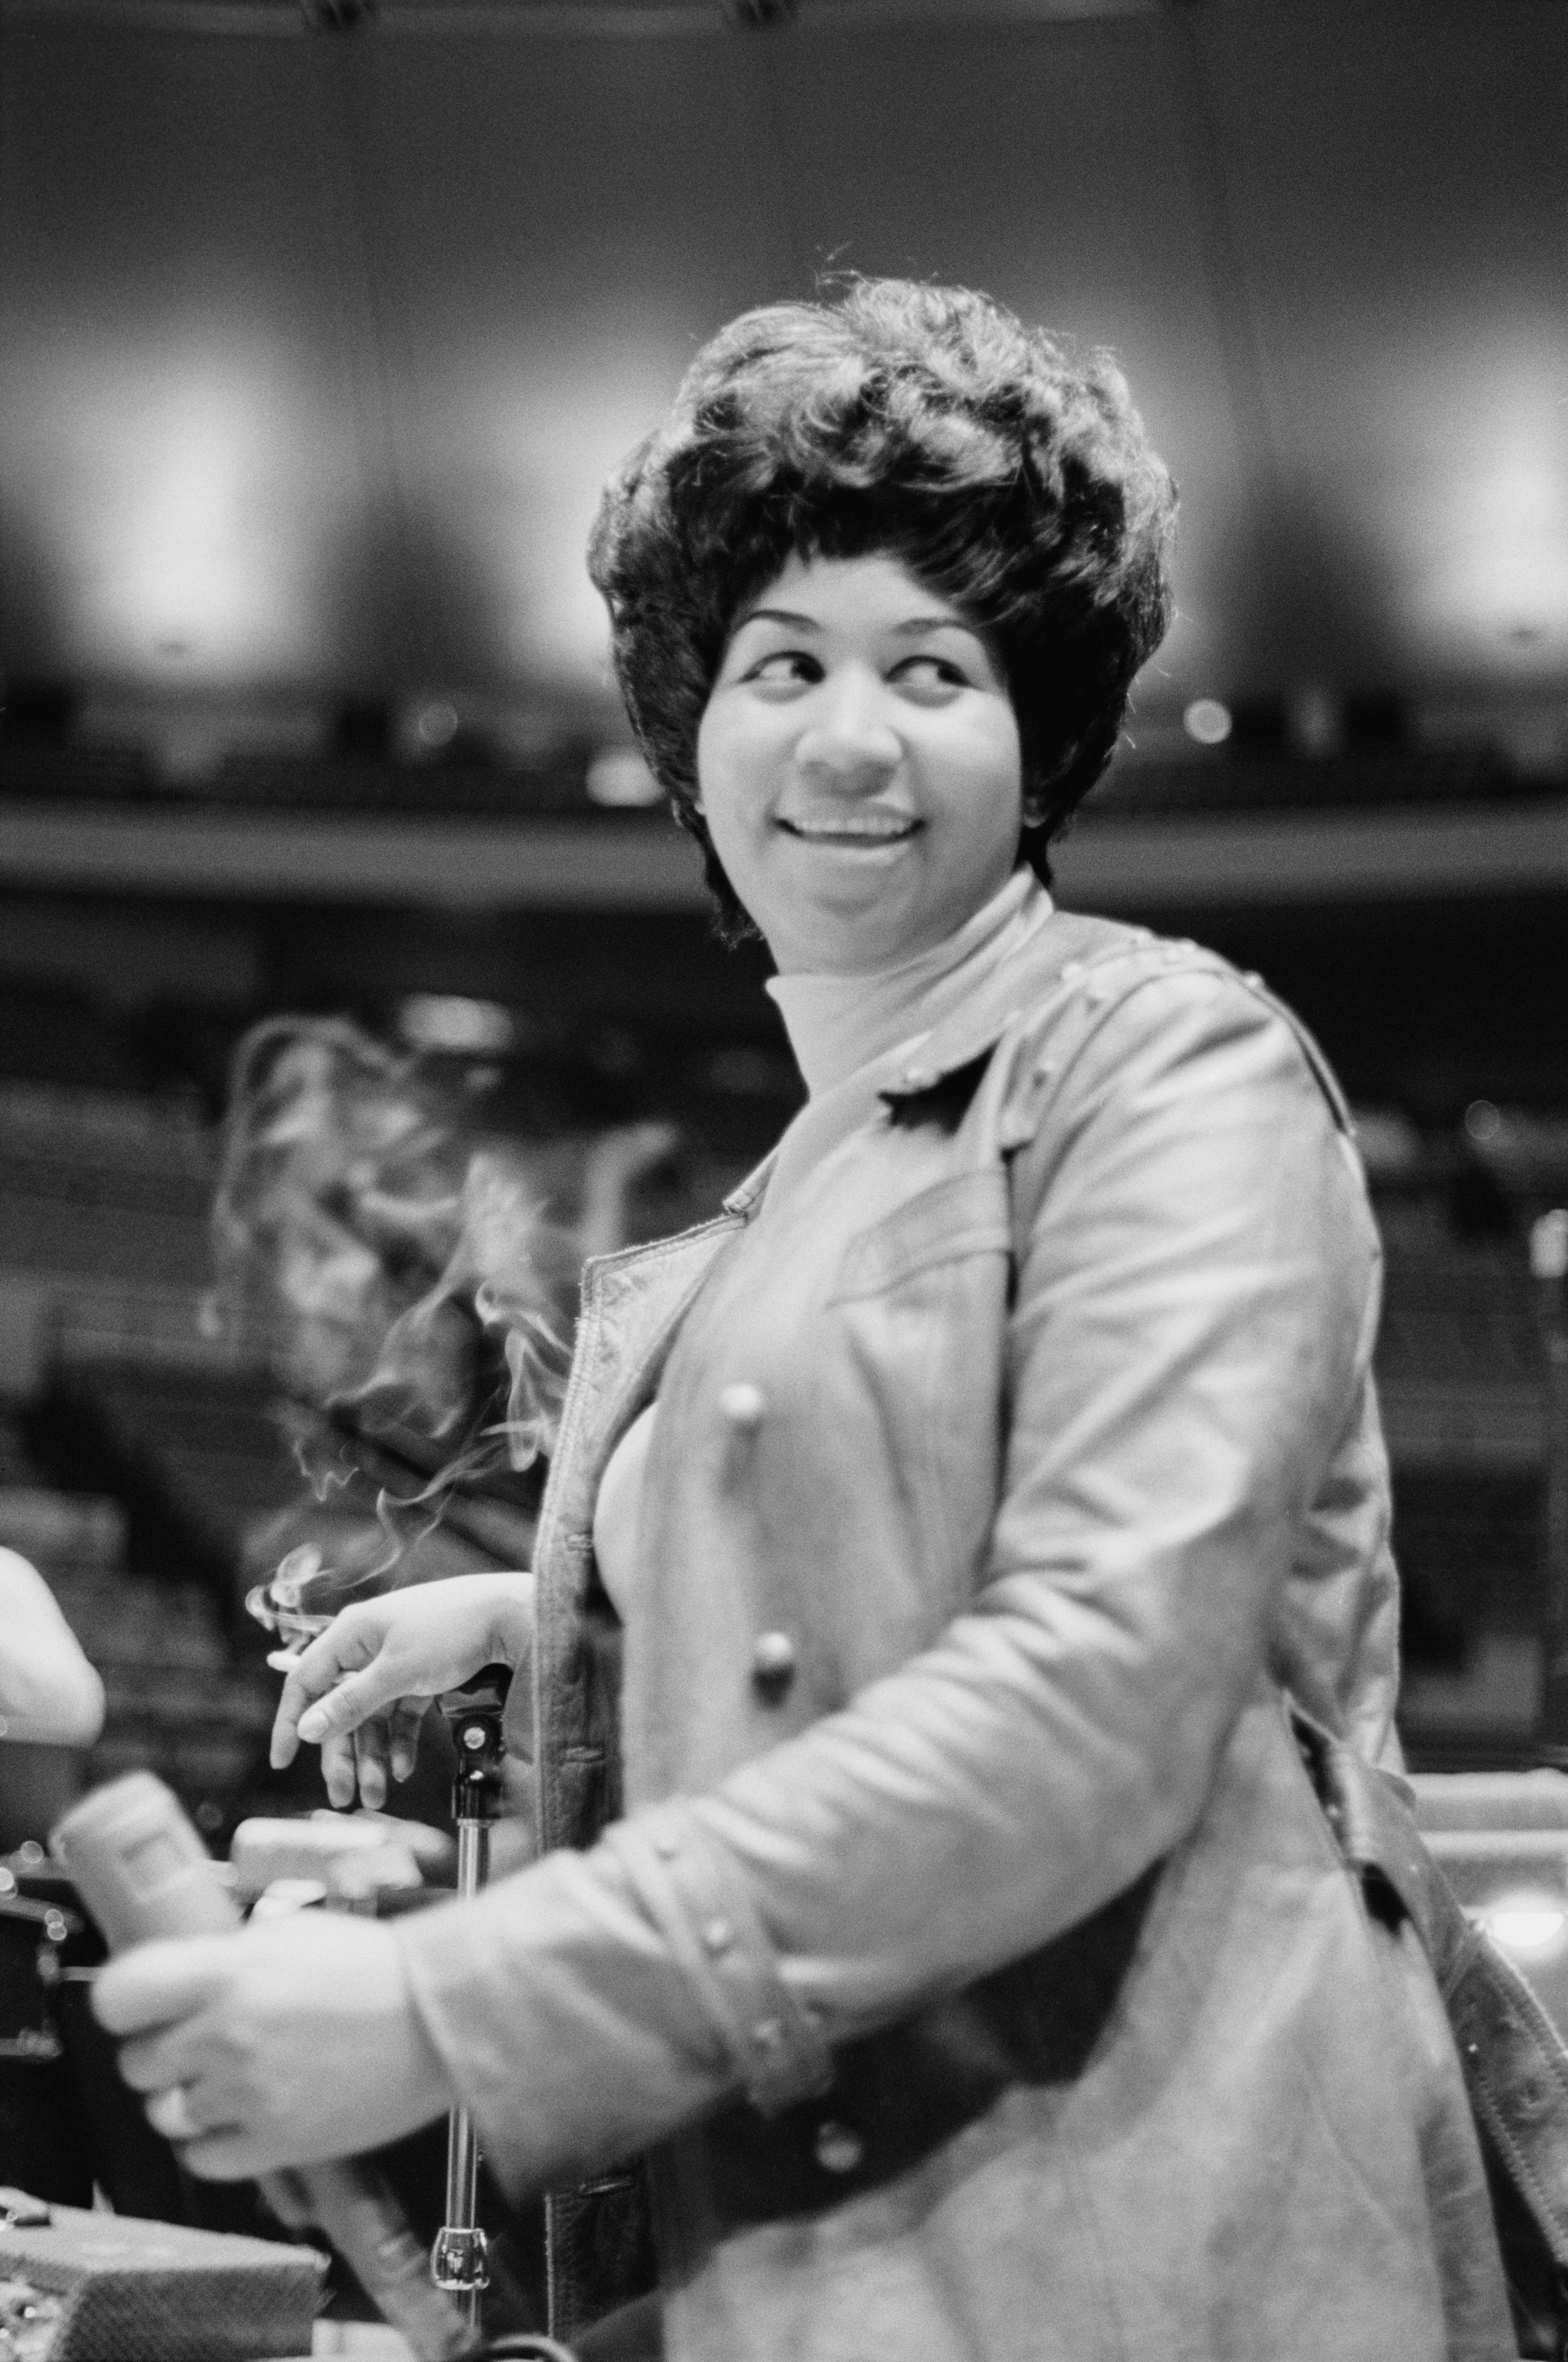 Aretha Franklin during rehearsals for the Soul Together show in Madison Square Garden, New York City, on June 28, 1968 | Photo: Don Paulsen/Michael Ochs Archives/Getty Images